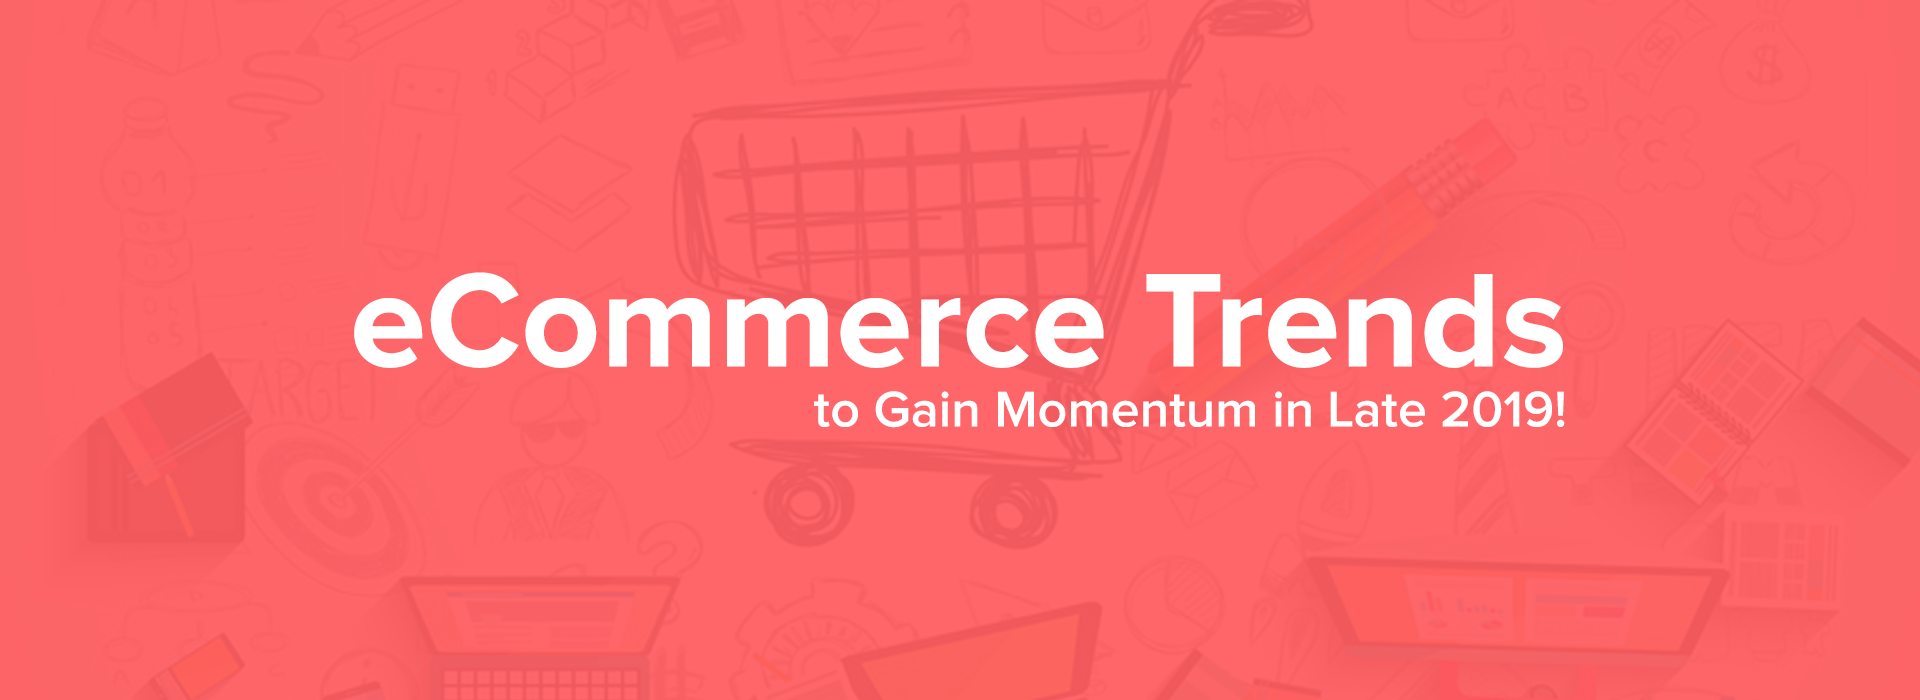 eCommerce-Trends-to-Gain-Momentum-in-Late-2019!